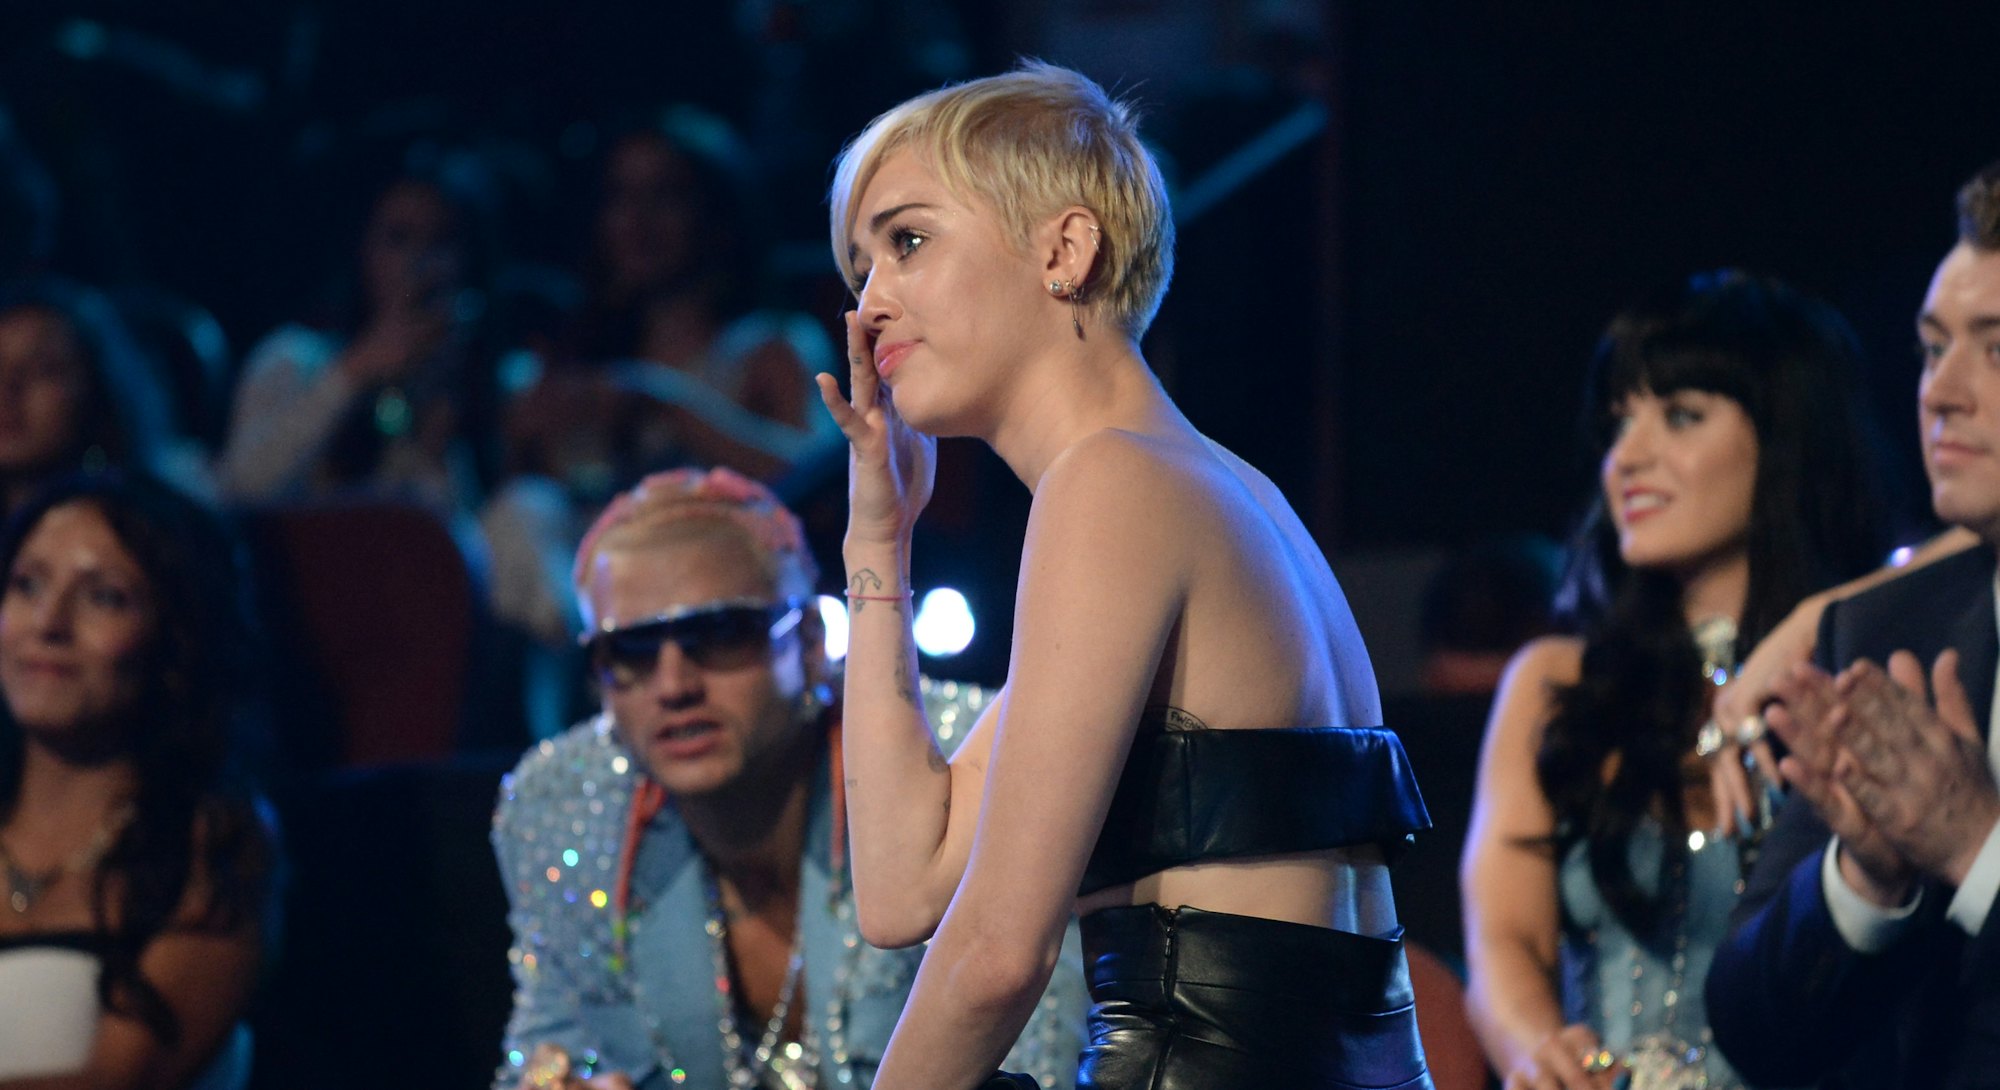 Miley Cyrus at the 2014 MTV Video Music Awards at The Forum on August 24, 2014, in Inglewood, Califo...